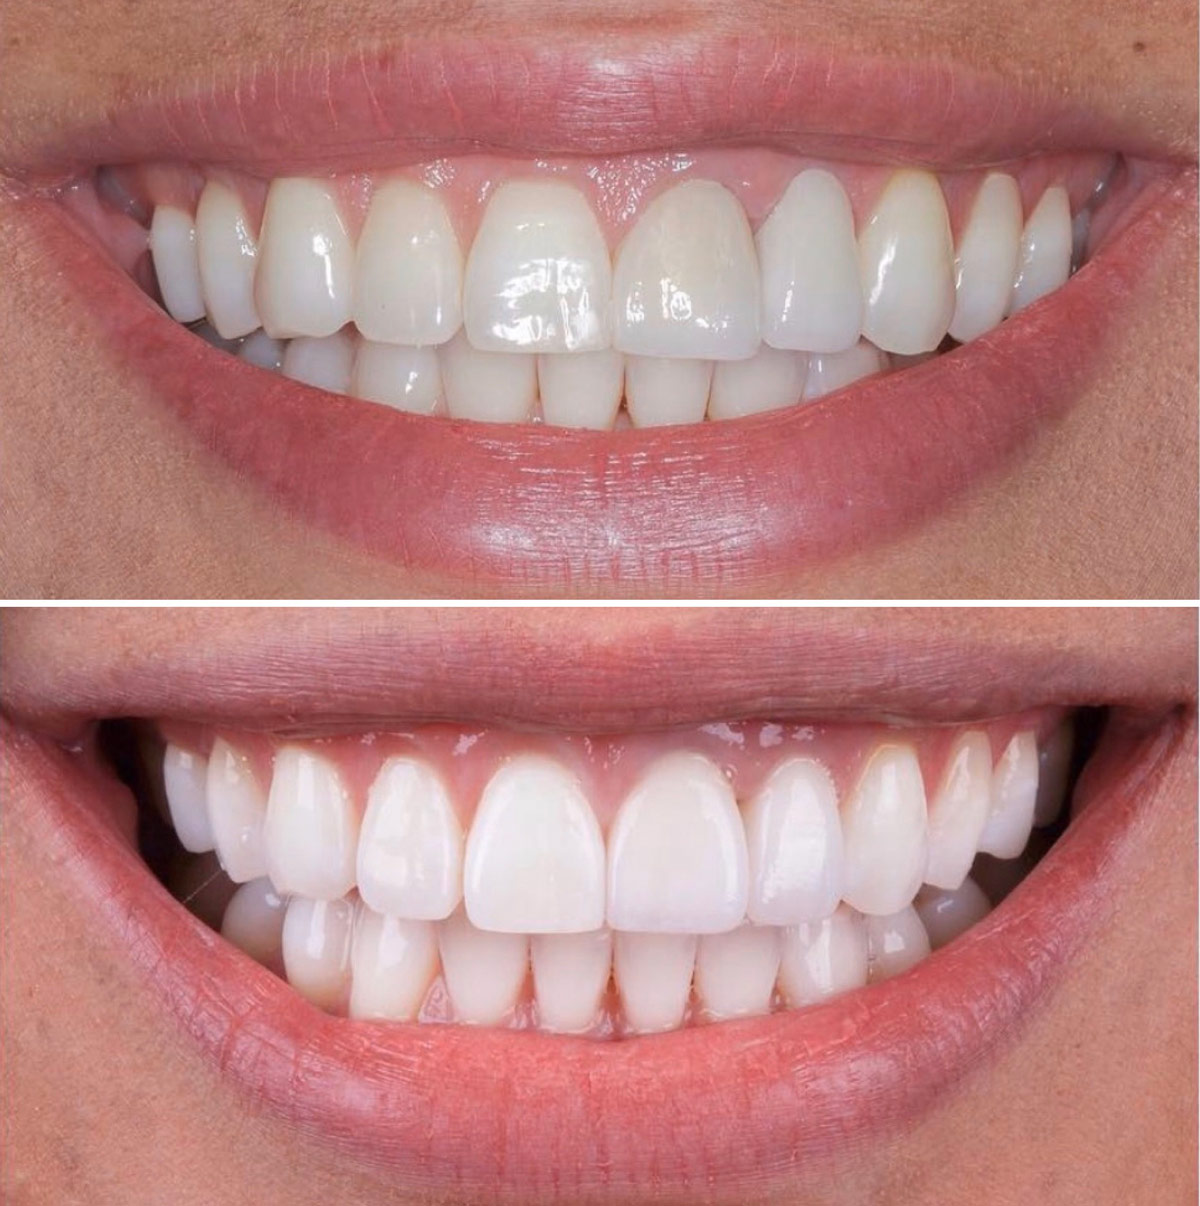 Emax Veneers In Turkey Can Be Completed In 5 Days